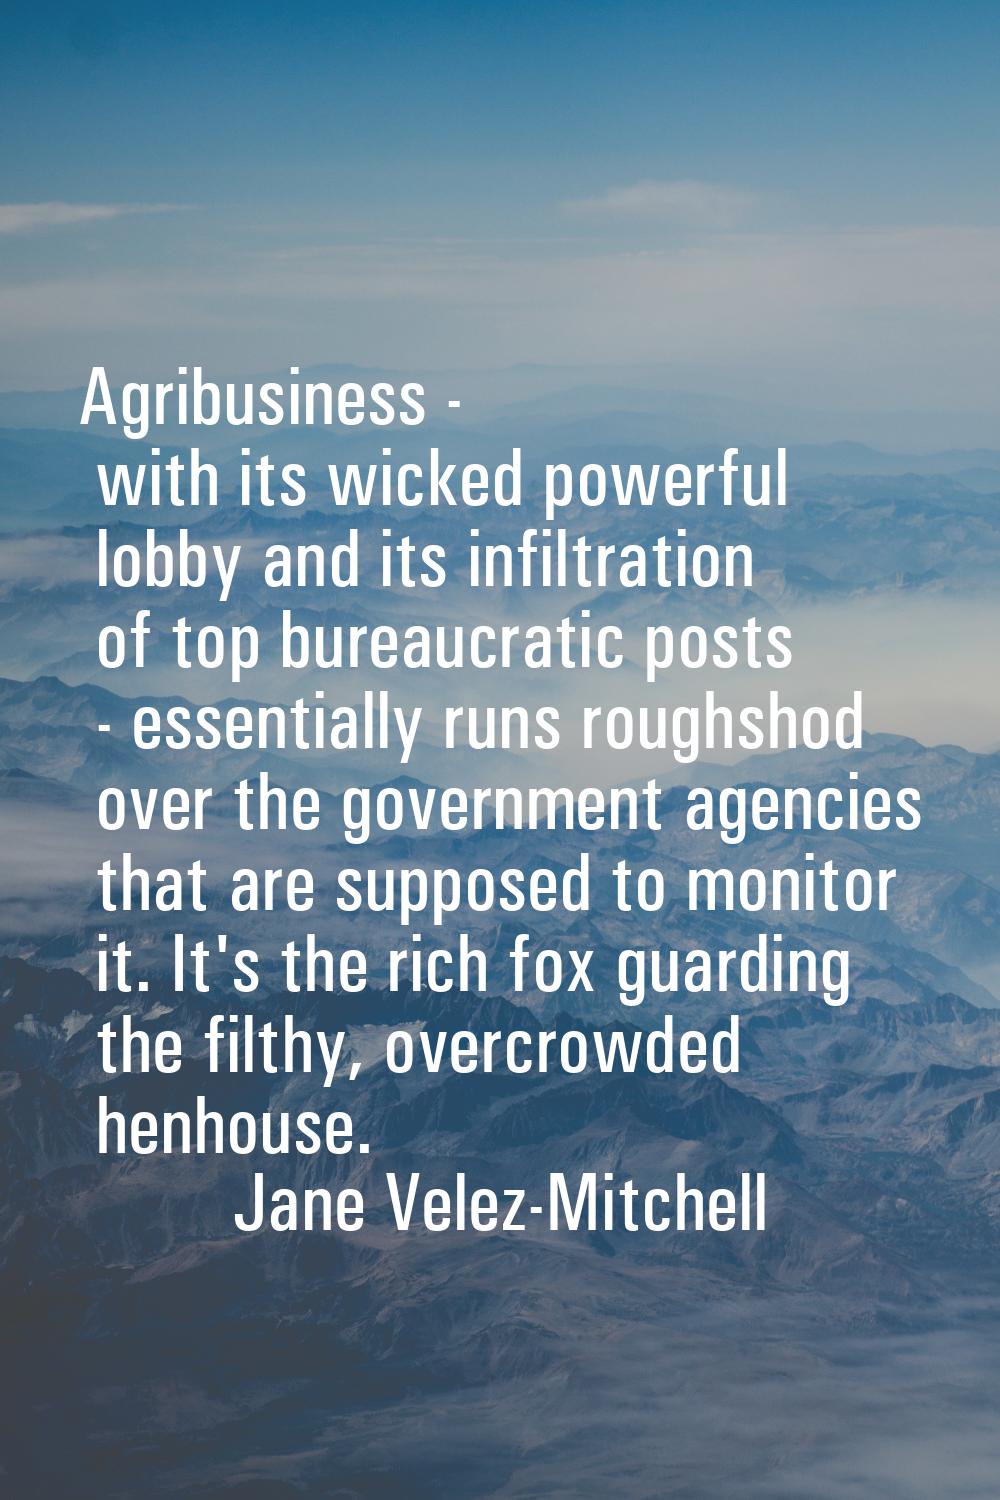 Agribusiness - with its wicked powerful lobby and its infiltration of top bureaucratic posts - esse